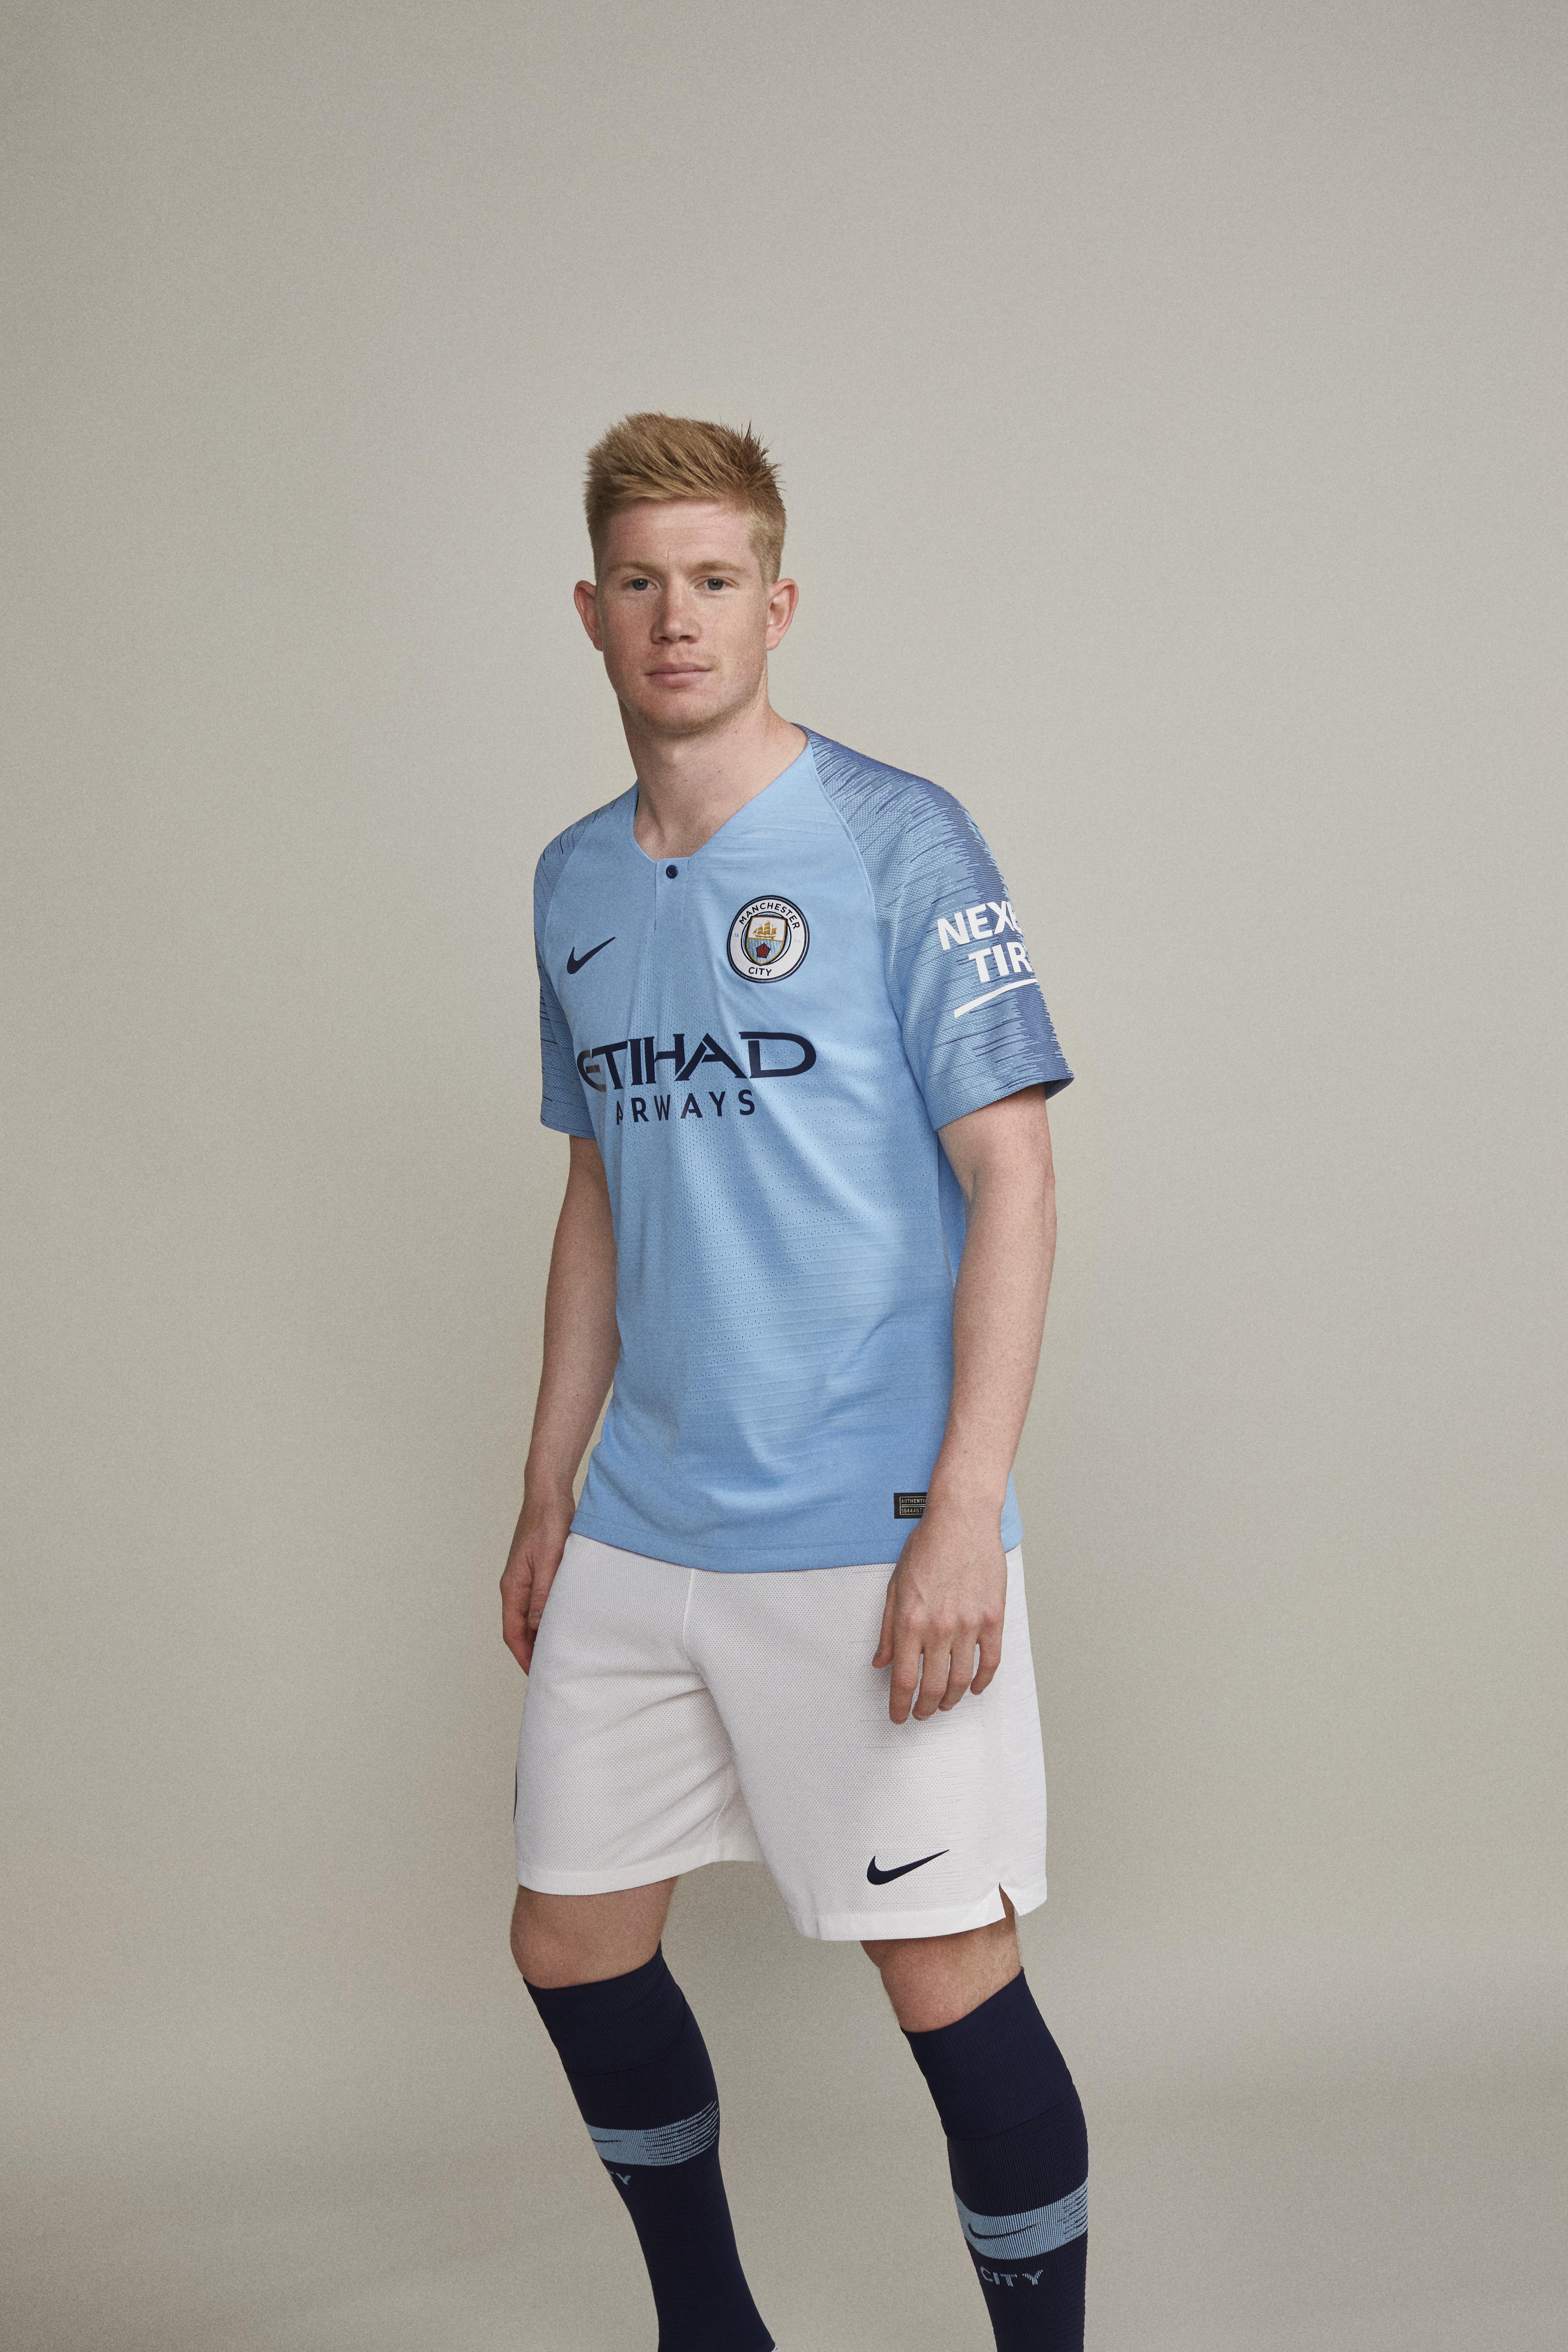 Nike Football unveils Manchester City's 2018/19 home kit